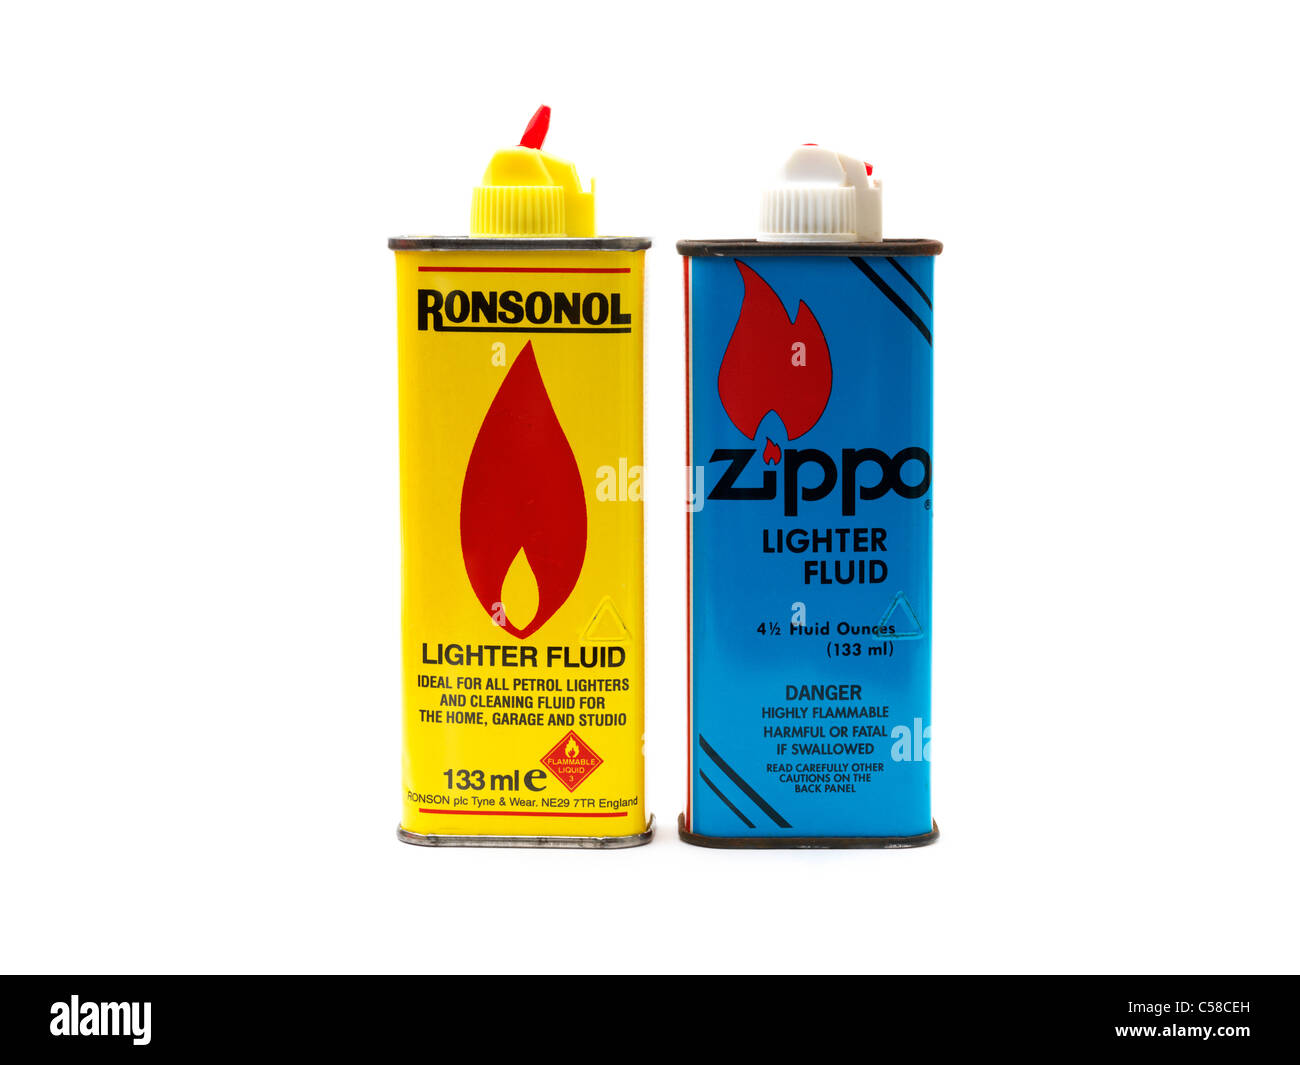 Cans Of Lighter Fluid Ronsonol And Zippo Stock Photo